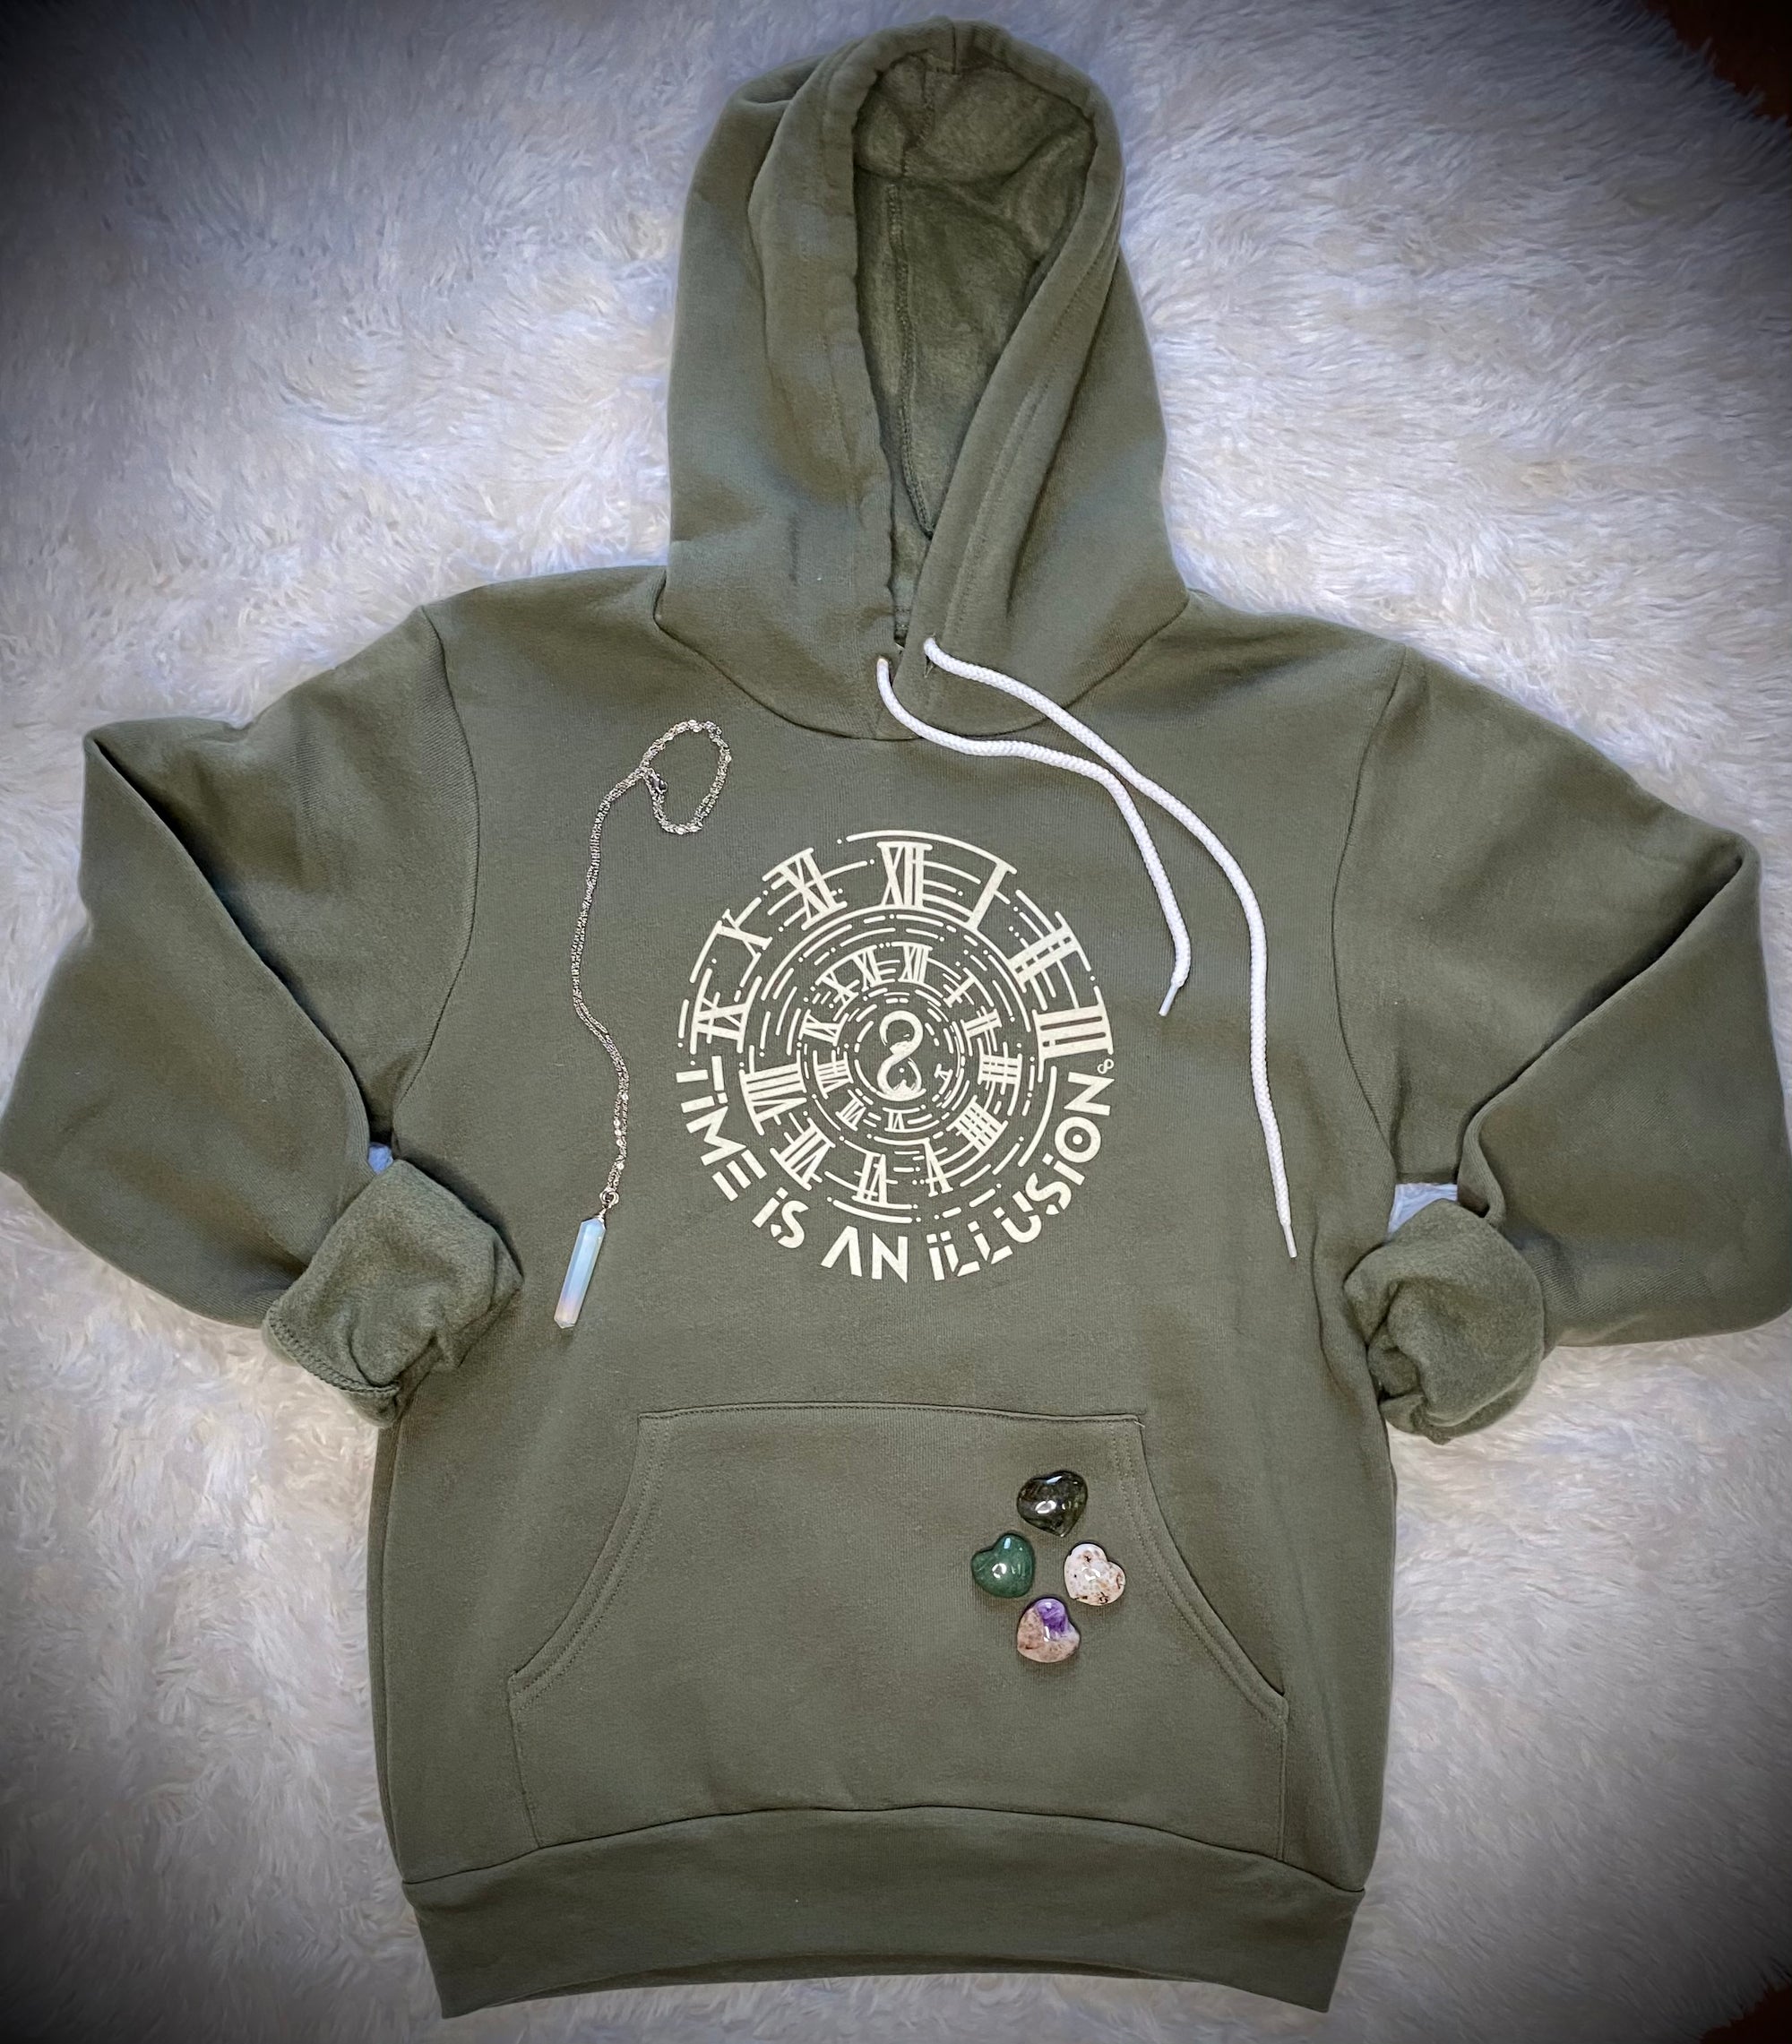 Last Ones! TIME is an Illusion, Hoodie